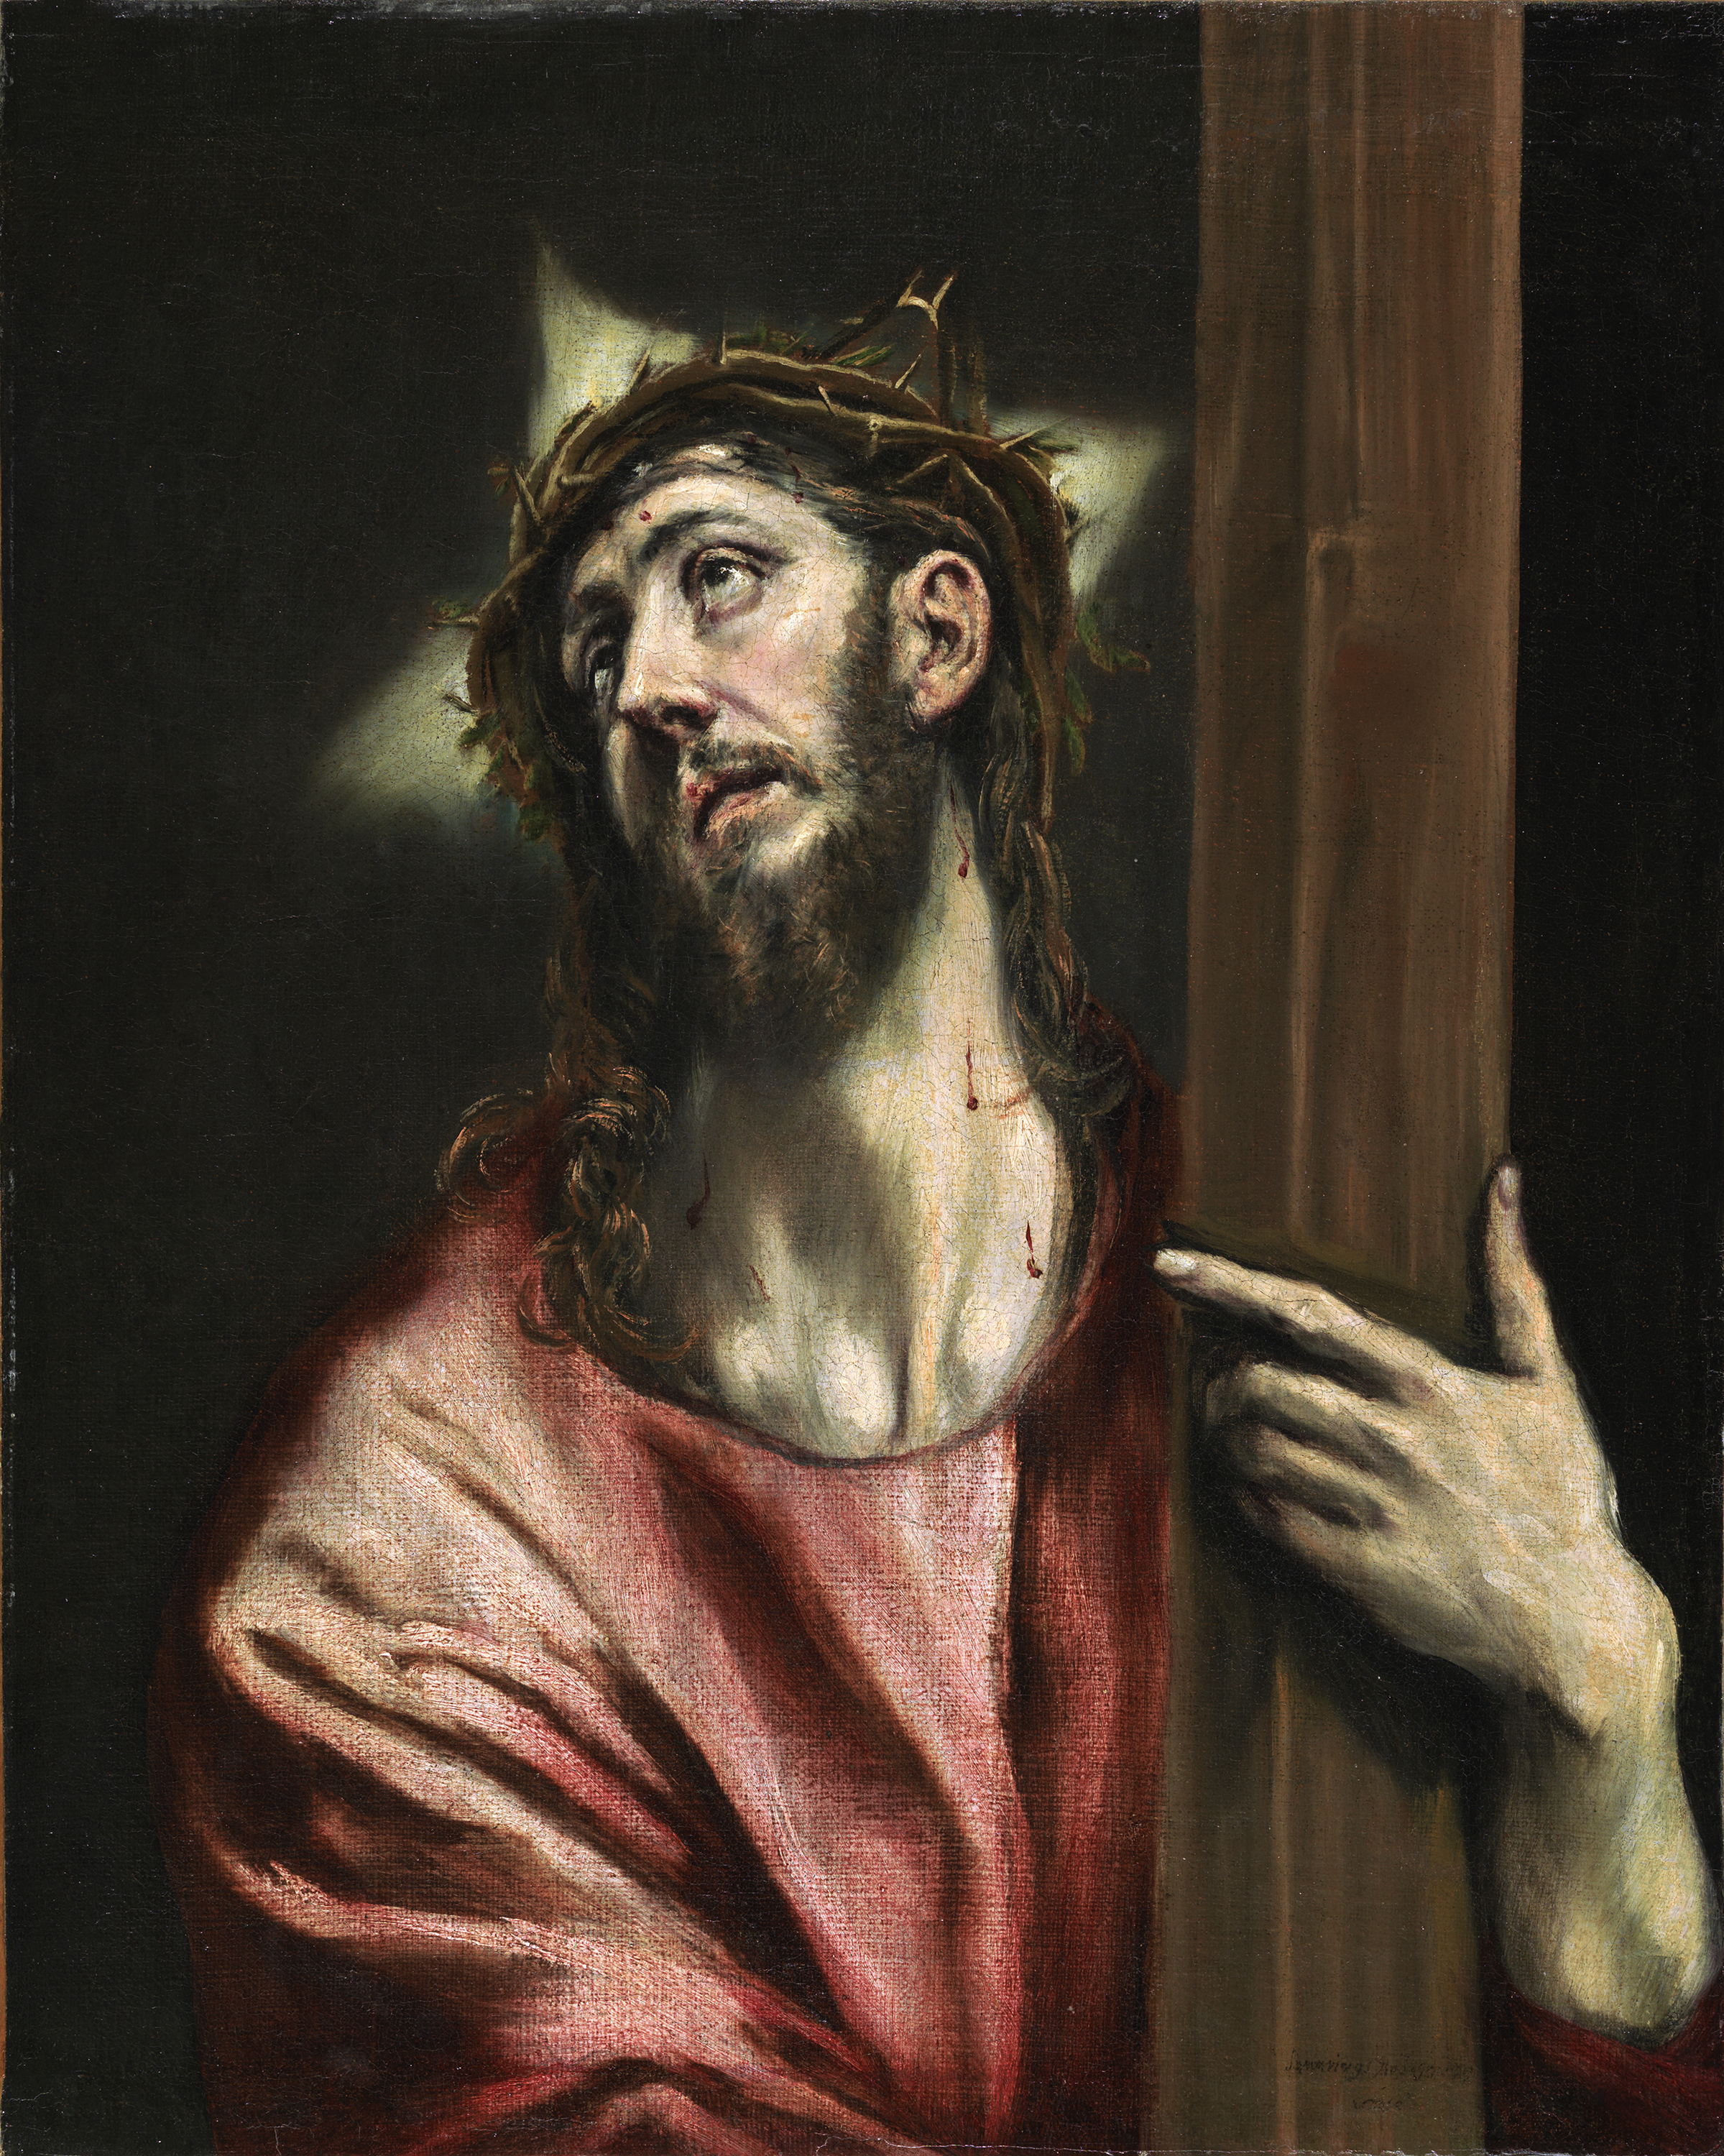 Christ with the Cross - Greco (Doménikos Theotokópoulos). Museo